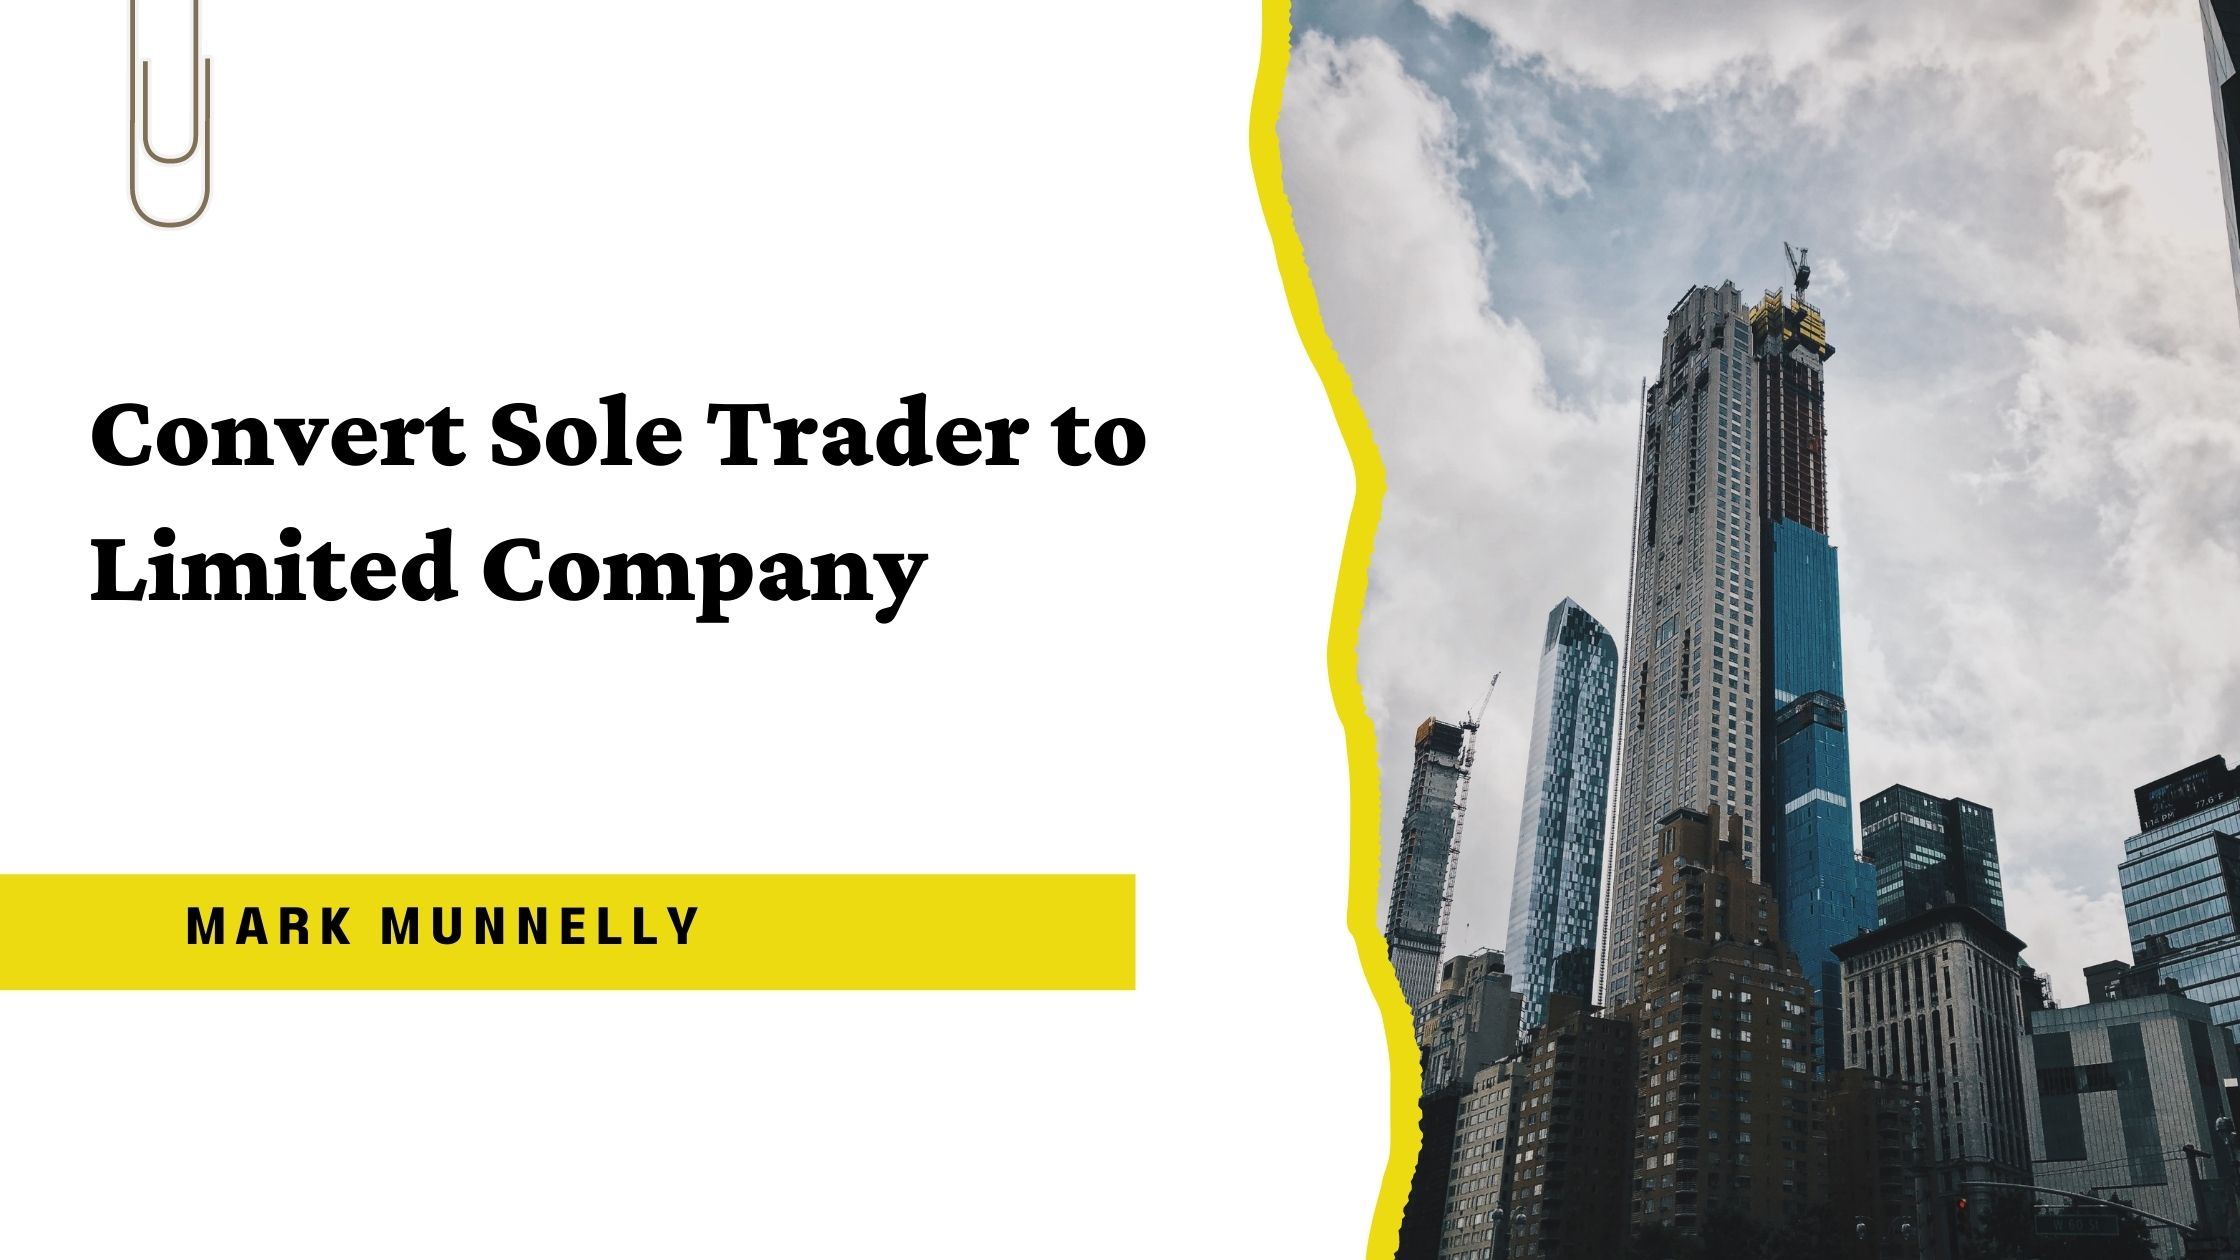 Convert Sole Trader to a Limited Company